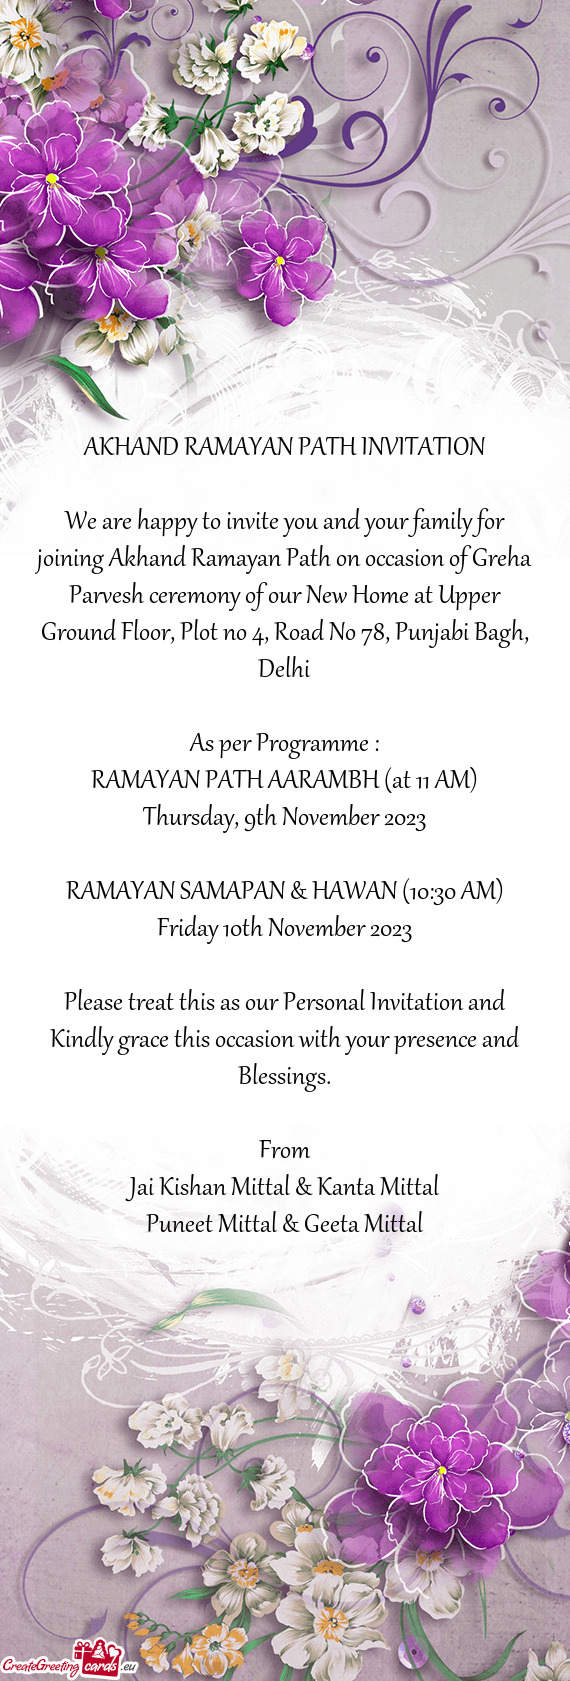 We are happy to invite you and your family for joining Akhand Ramayan Path on occasion of Greha Parv